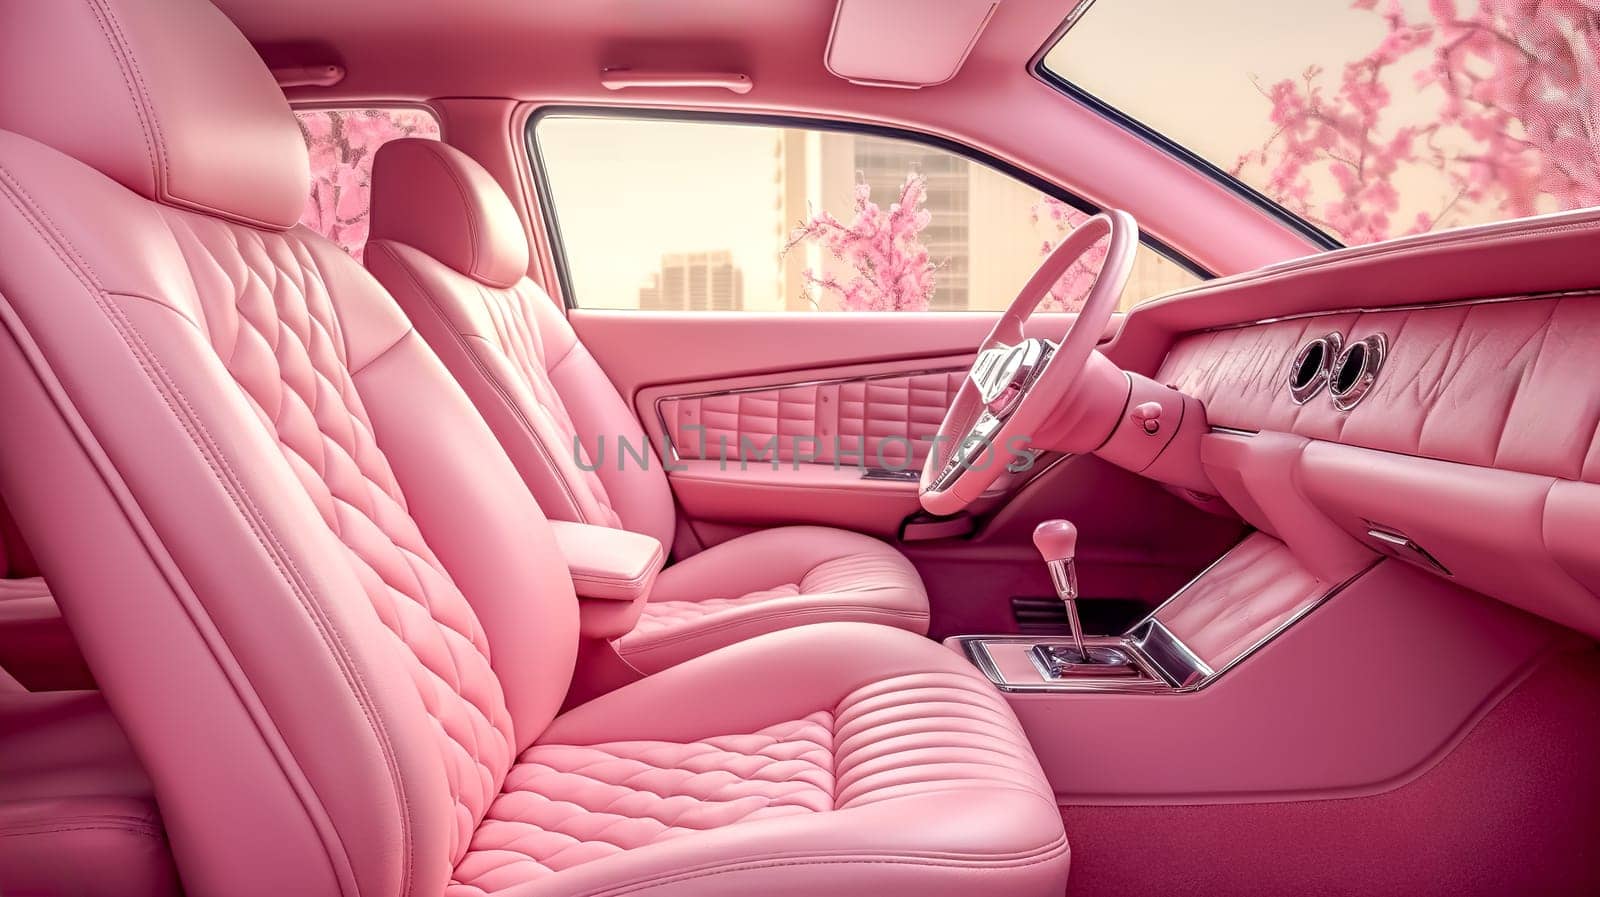 luxurious car interior boasts elegant pink upholstery, offering a blend of sophistication and modern style.